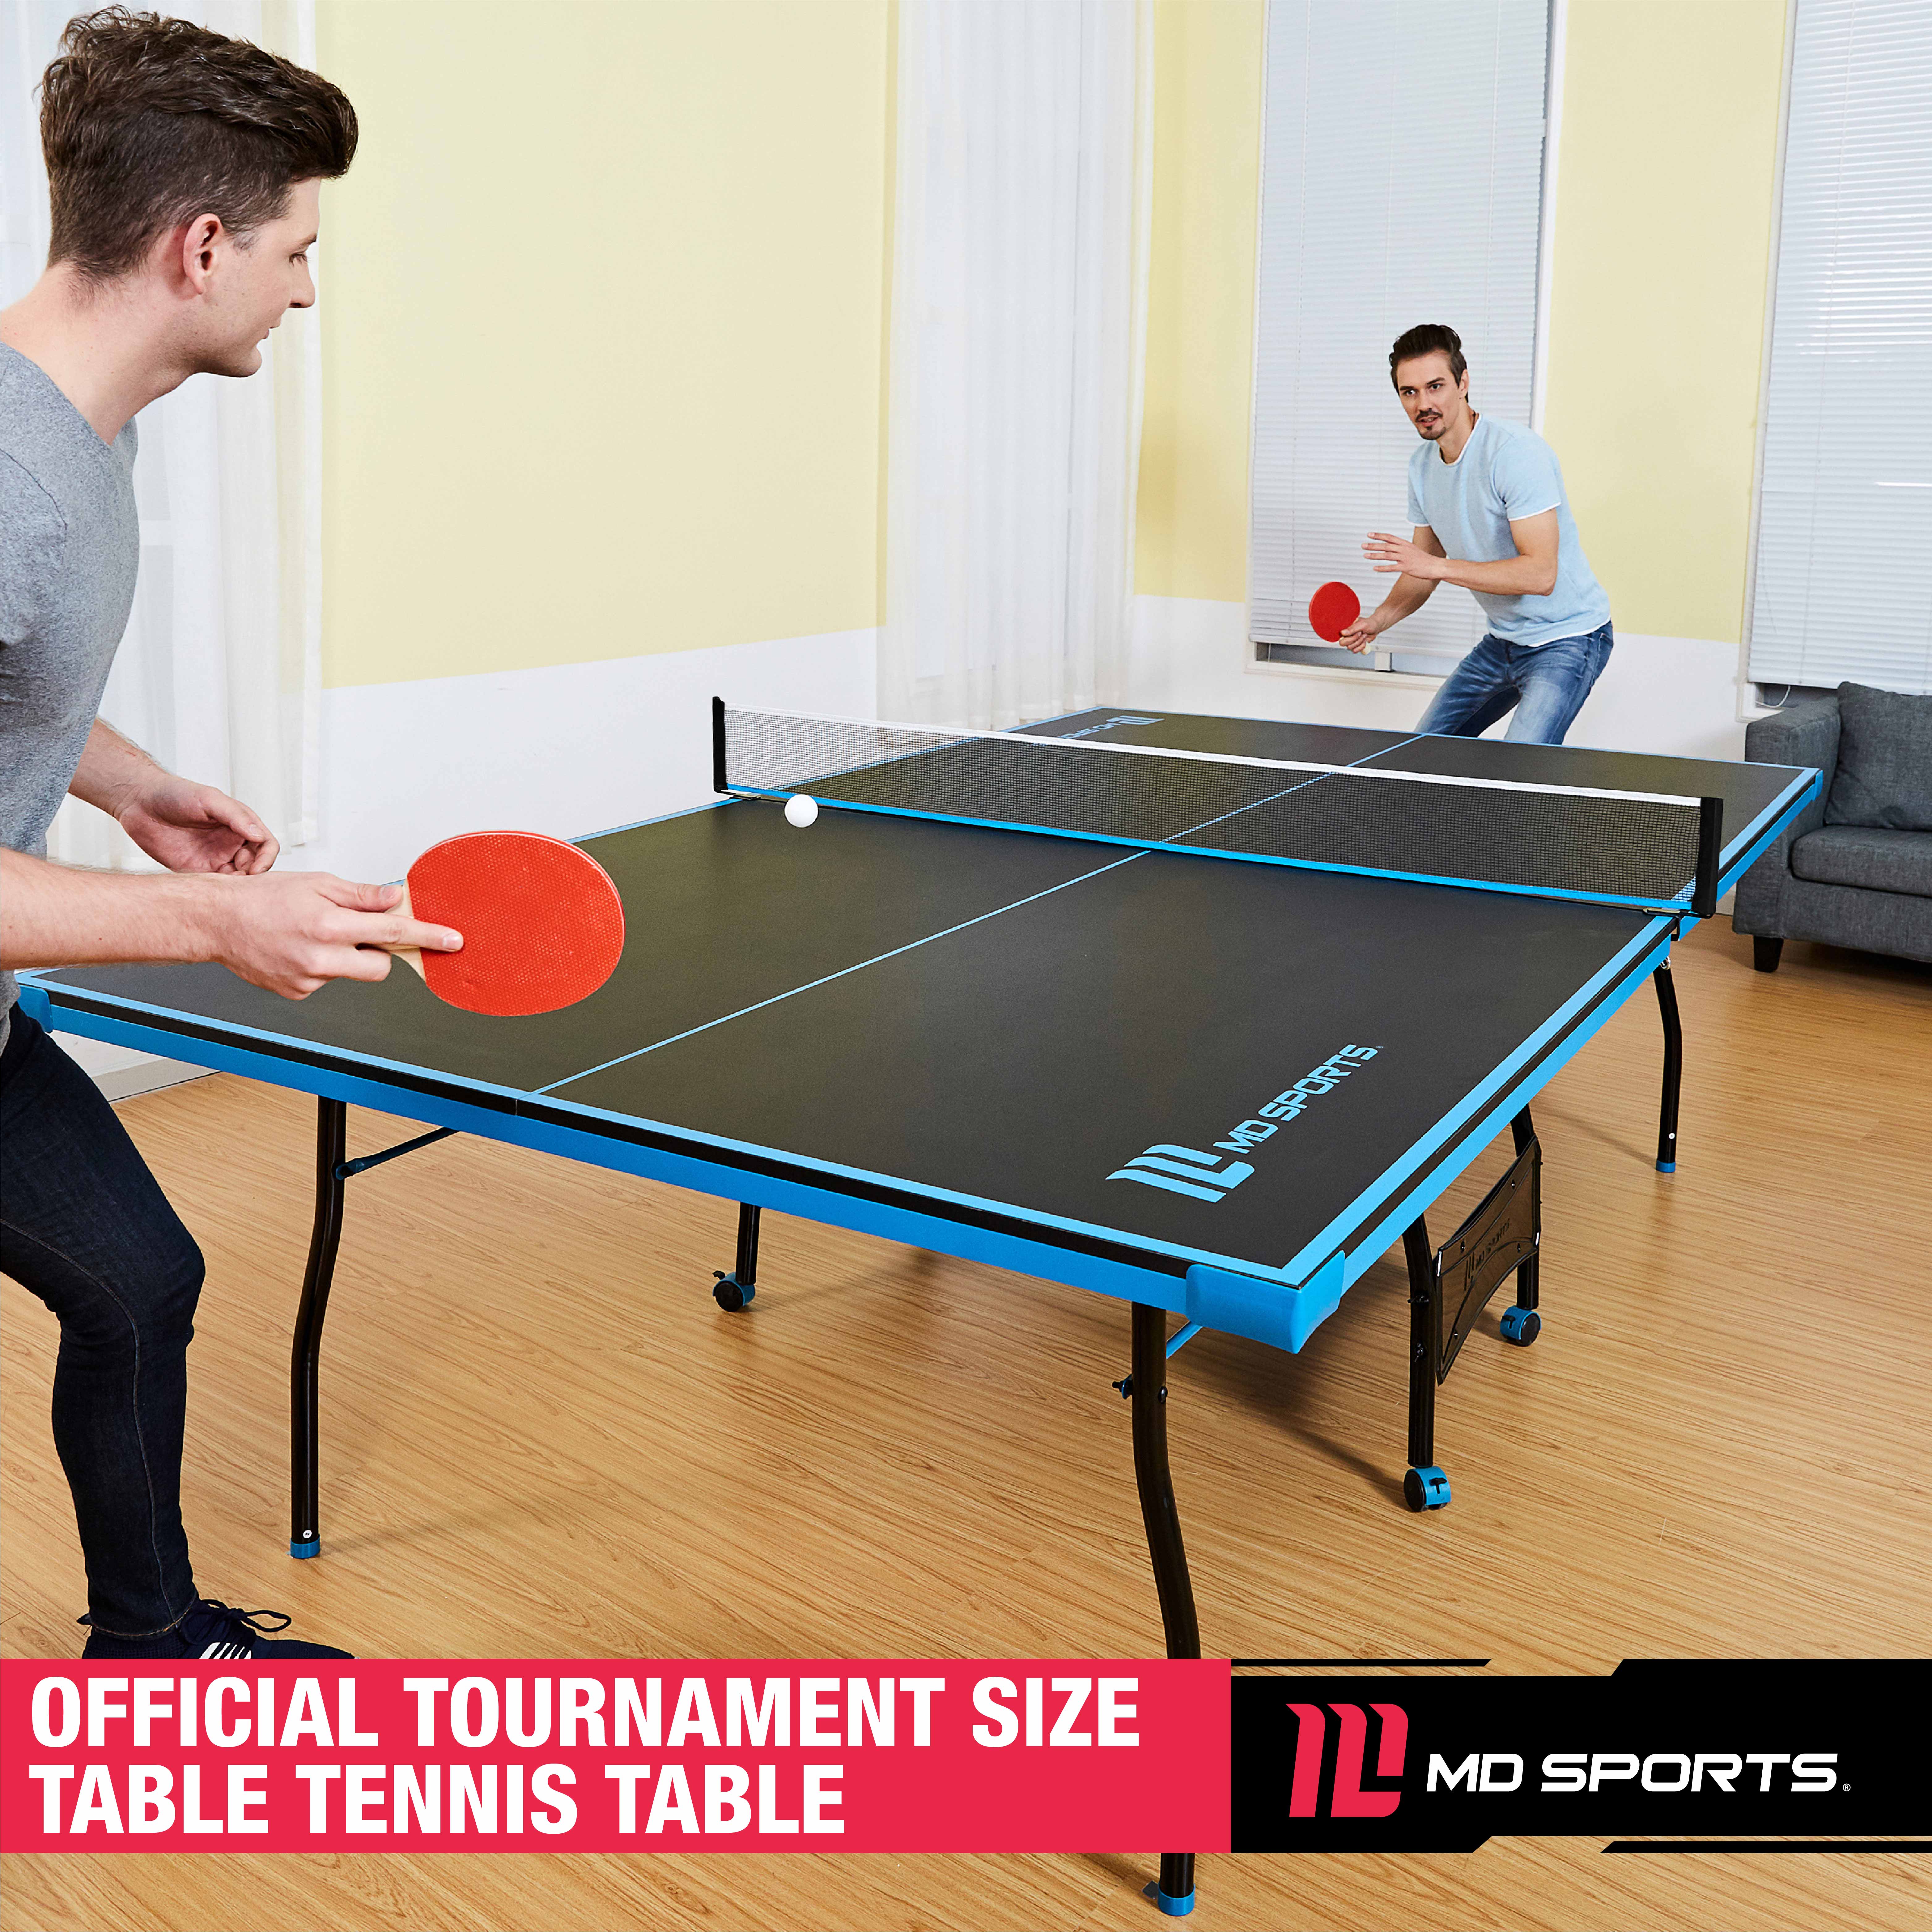 MD Sports Official Size Table Tennis Table - image 5 of 13